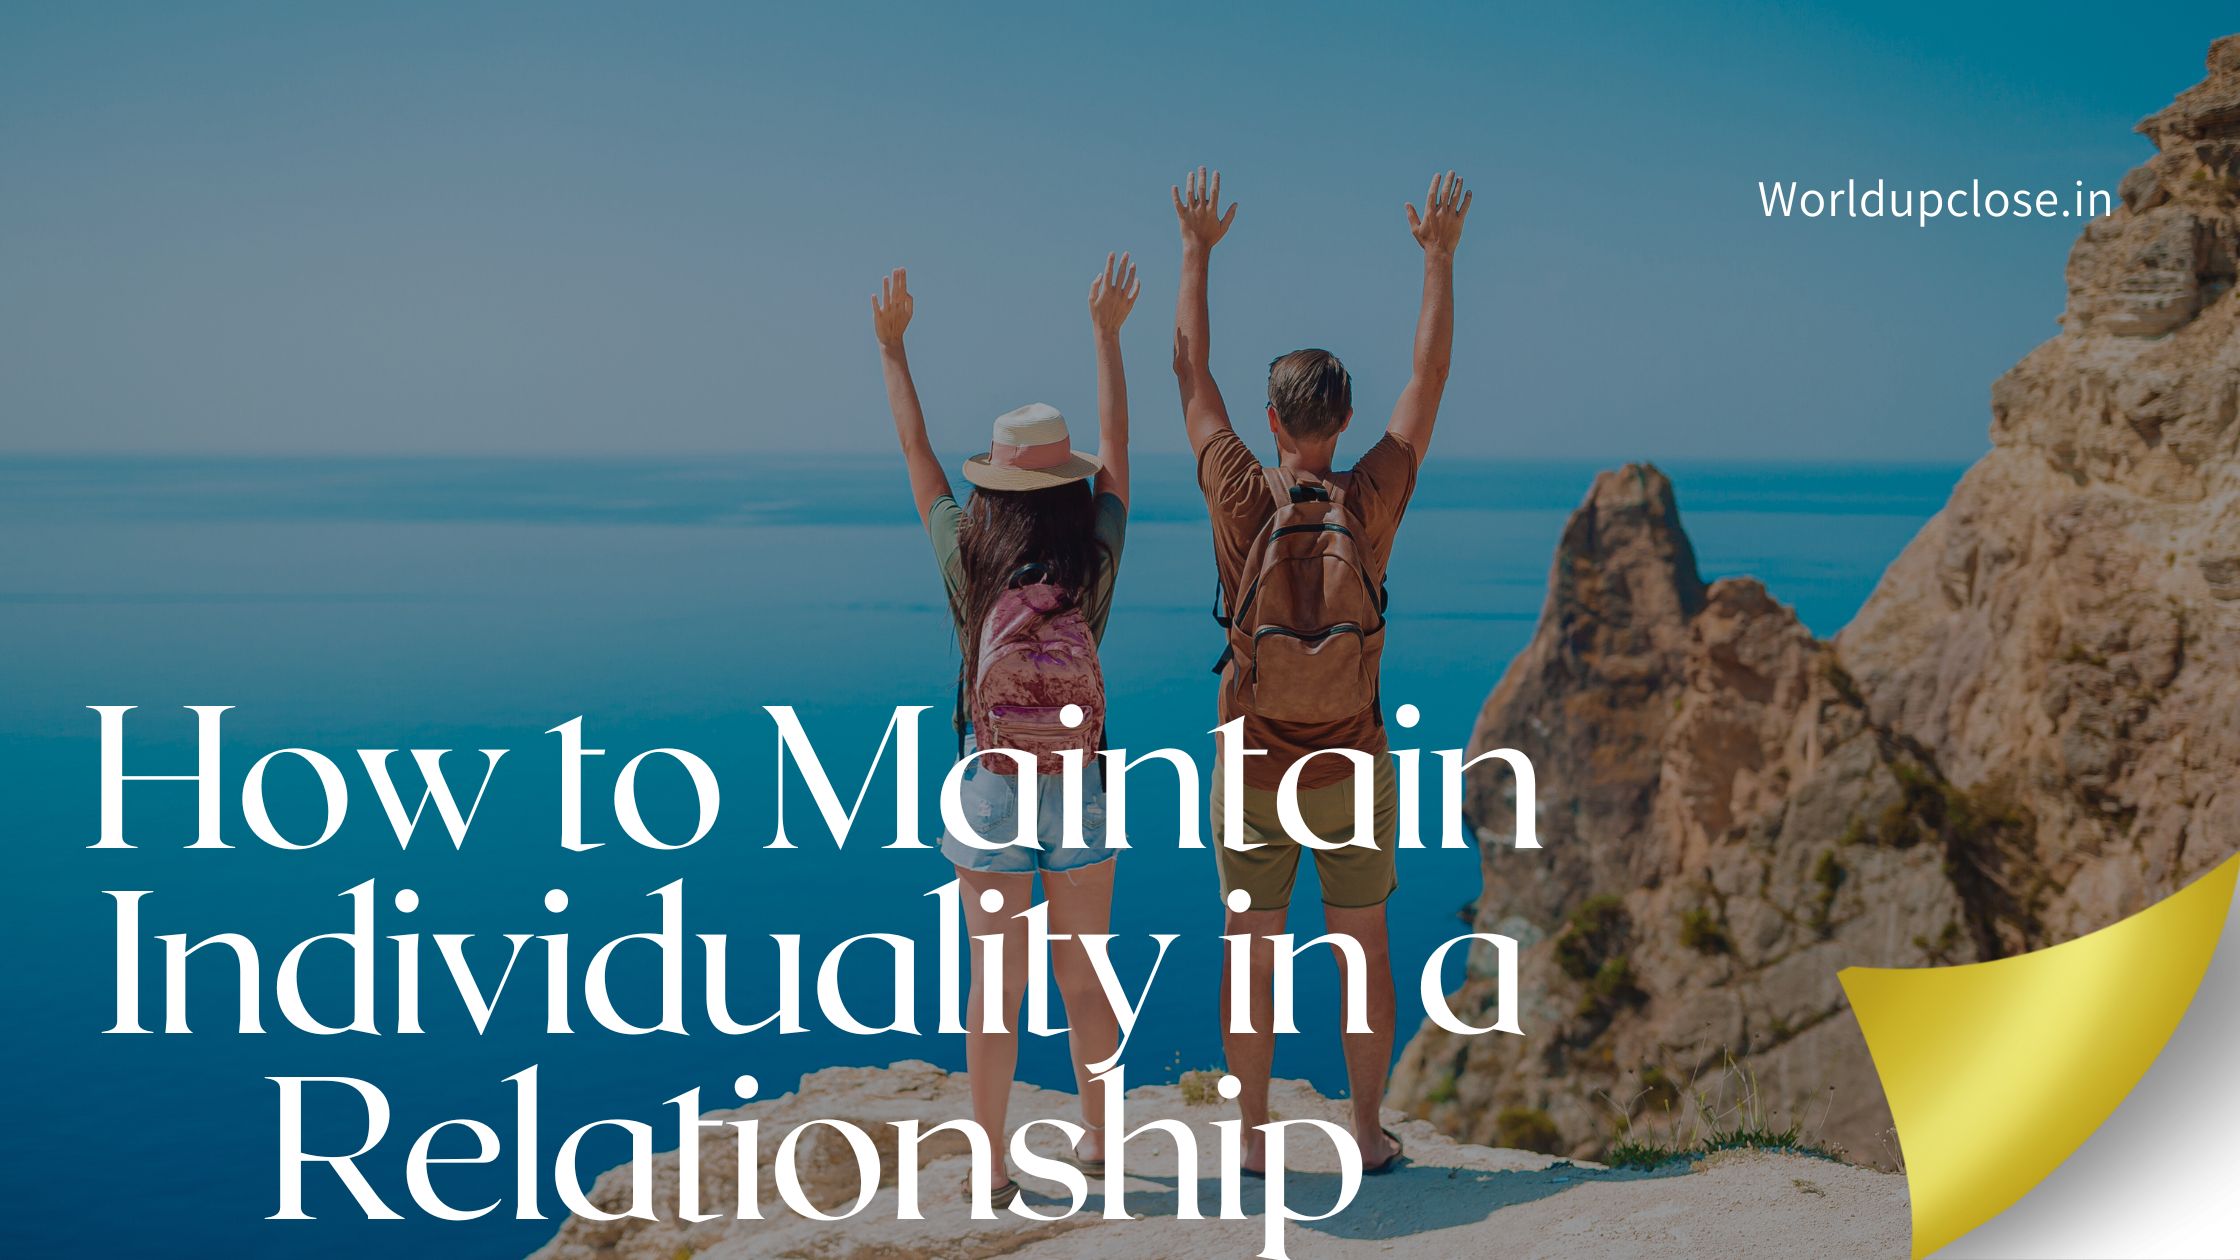 How to Maintain Individuality in a Relationship - 12 Successful Ways 1